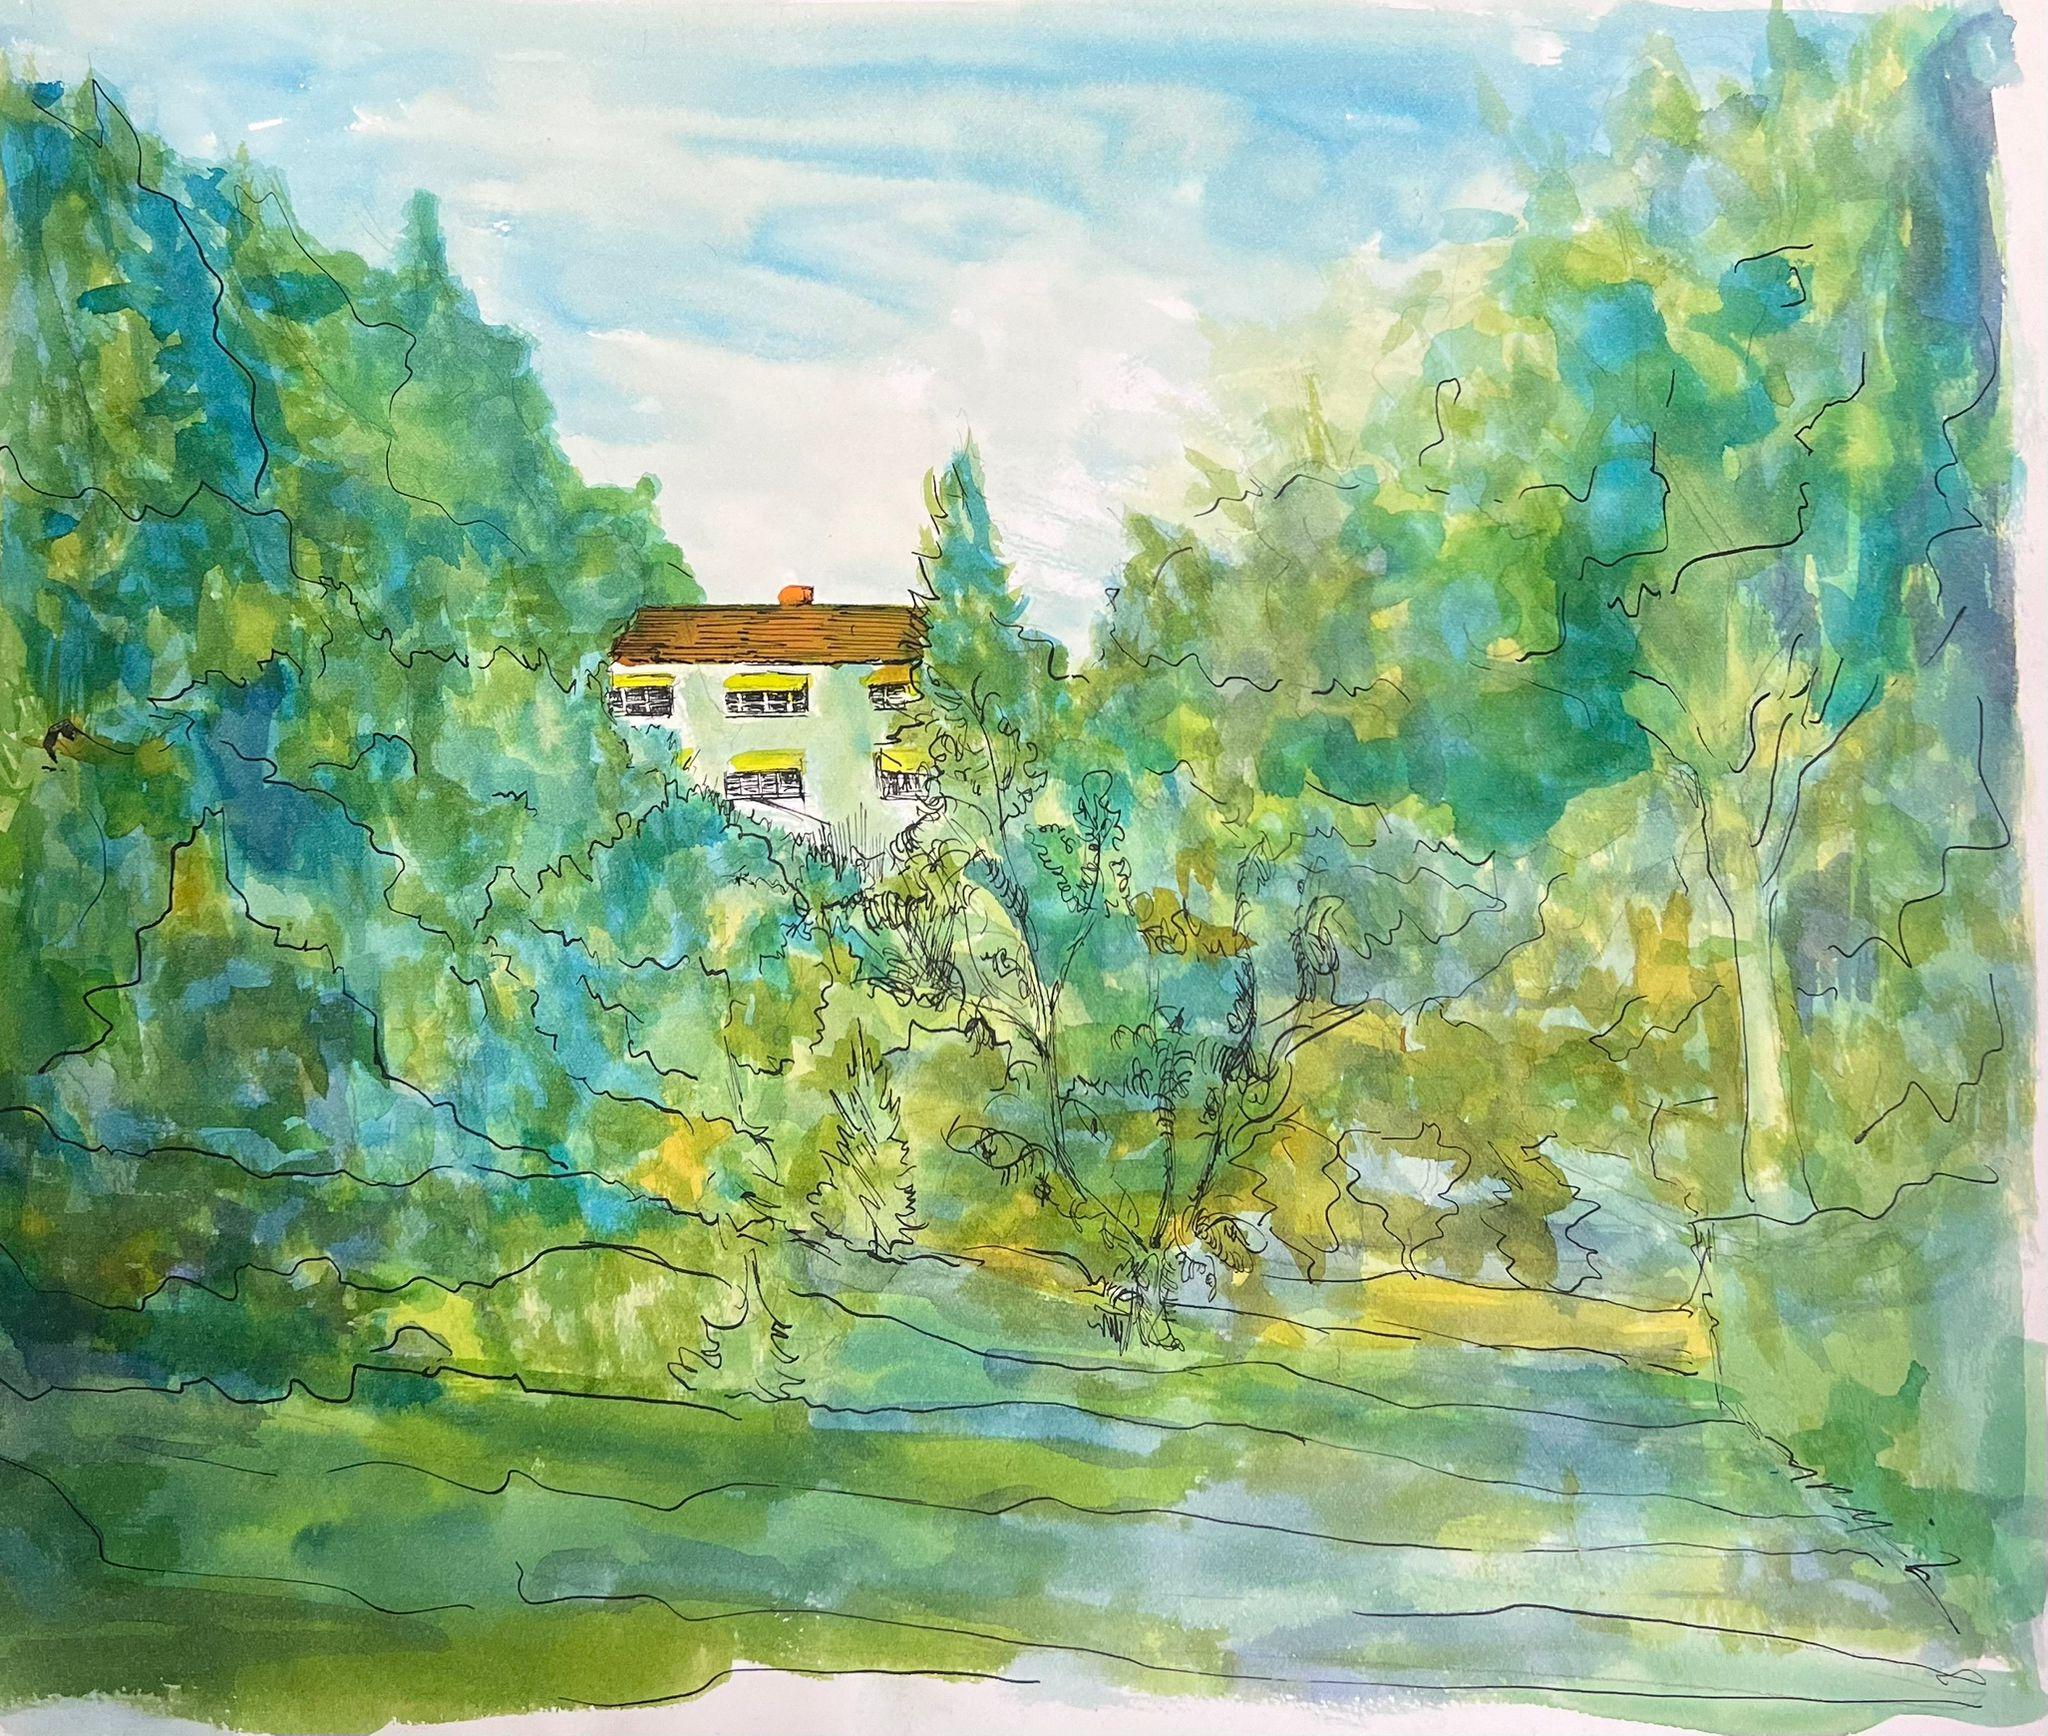 Bernard Labbe Landscape Painting - 1950's Modernist Painting Bright Watercolour Chateau In Green and Blue Forest